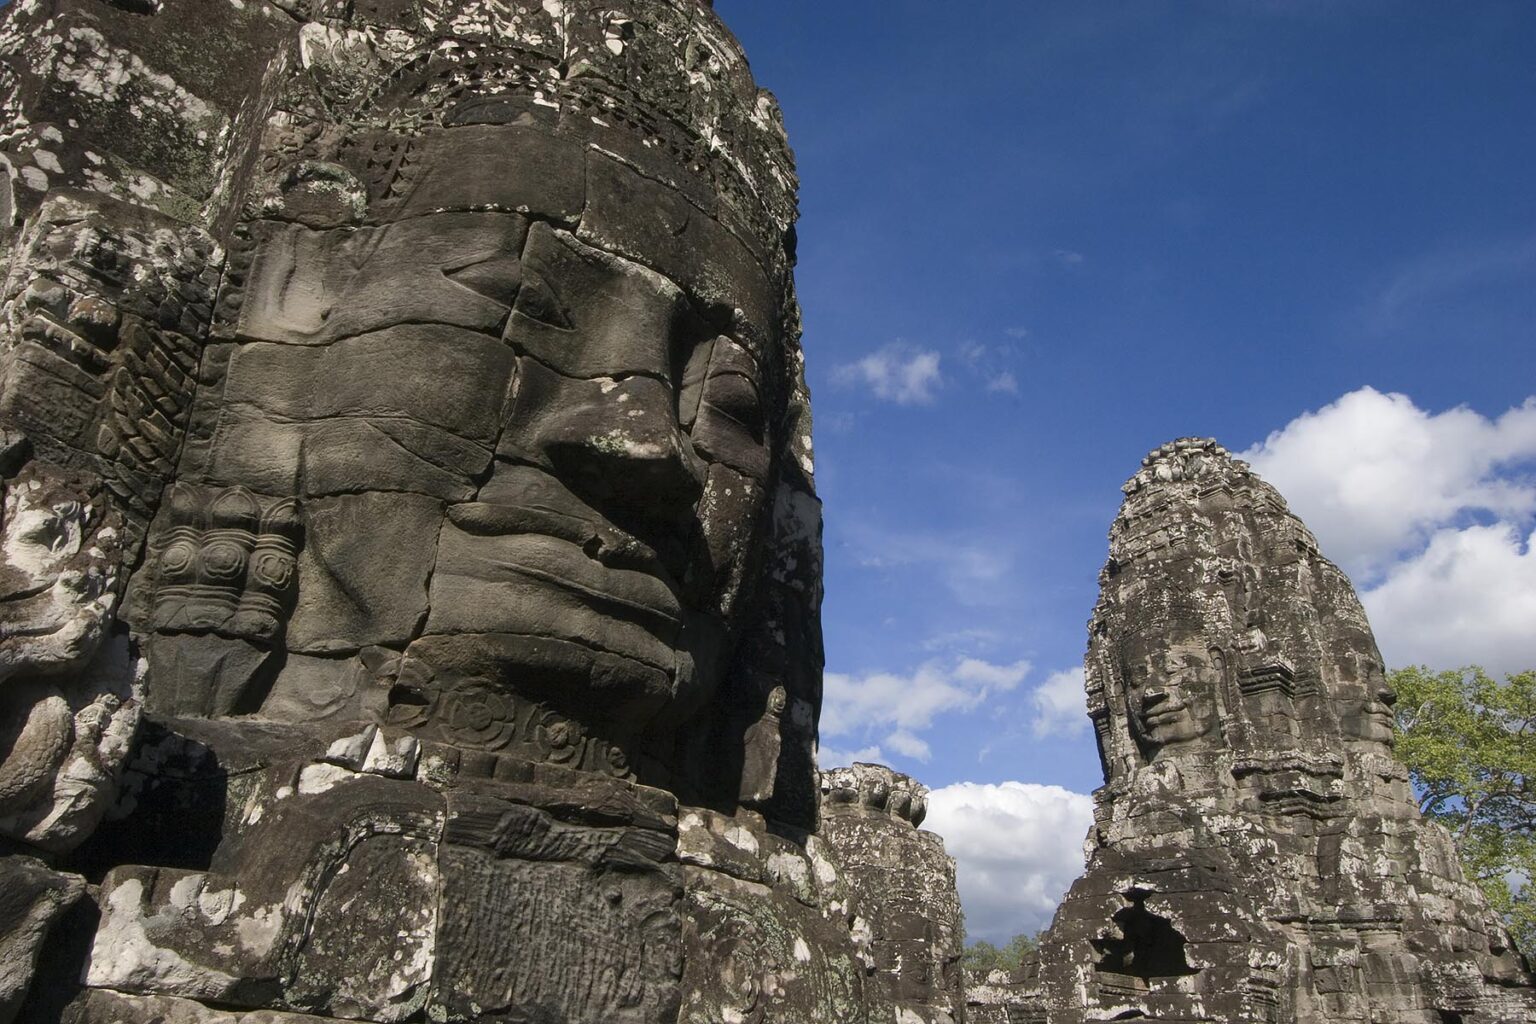 The face towers of The Bayon at Angkor Thom, the largest Khmer city ever built, are part of the Angkor Wat complex - Siem Reap, Cambodia